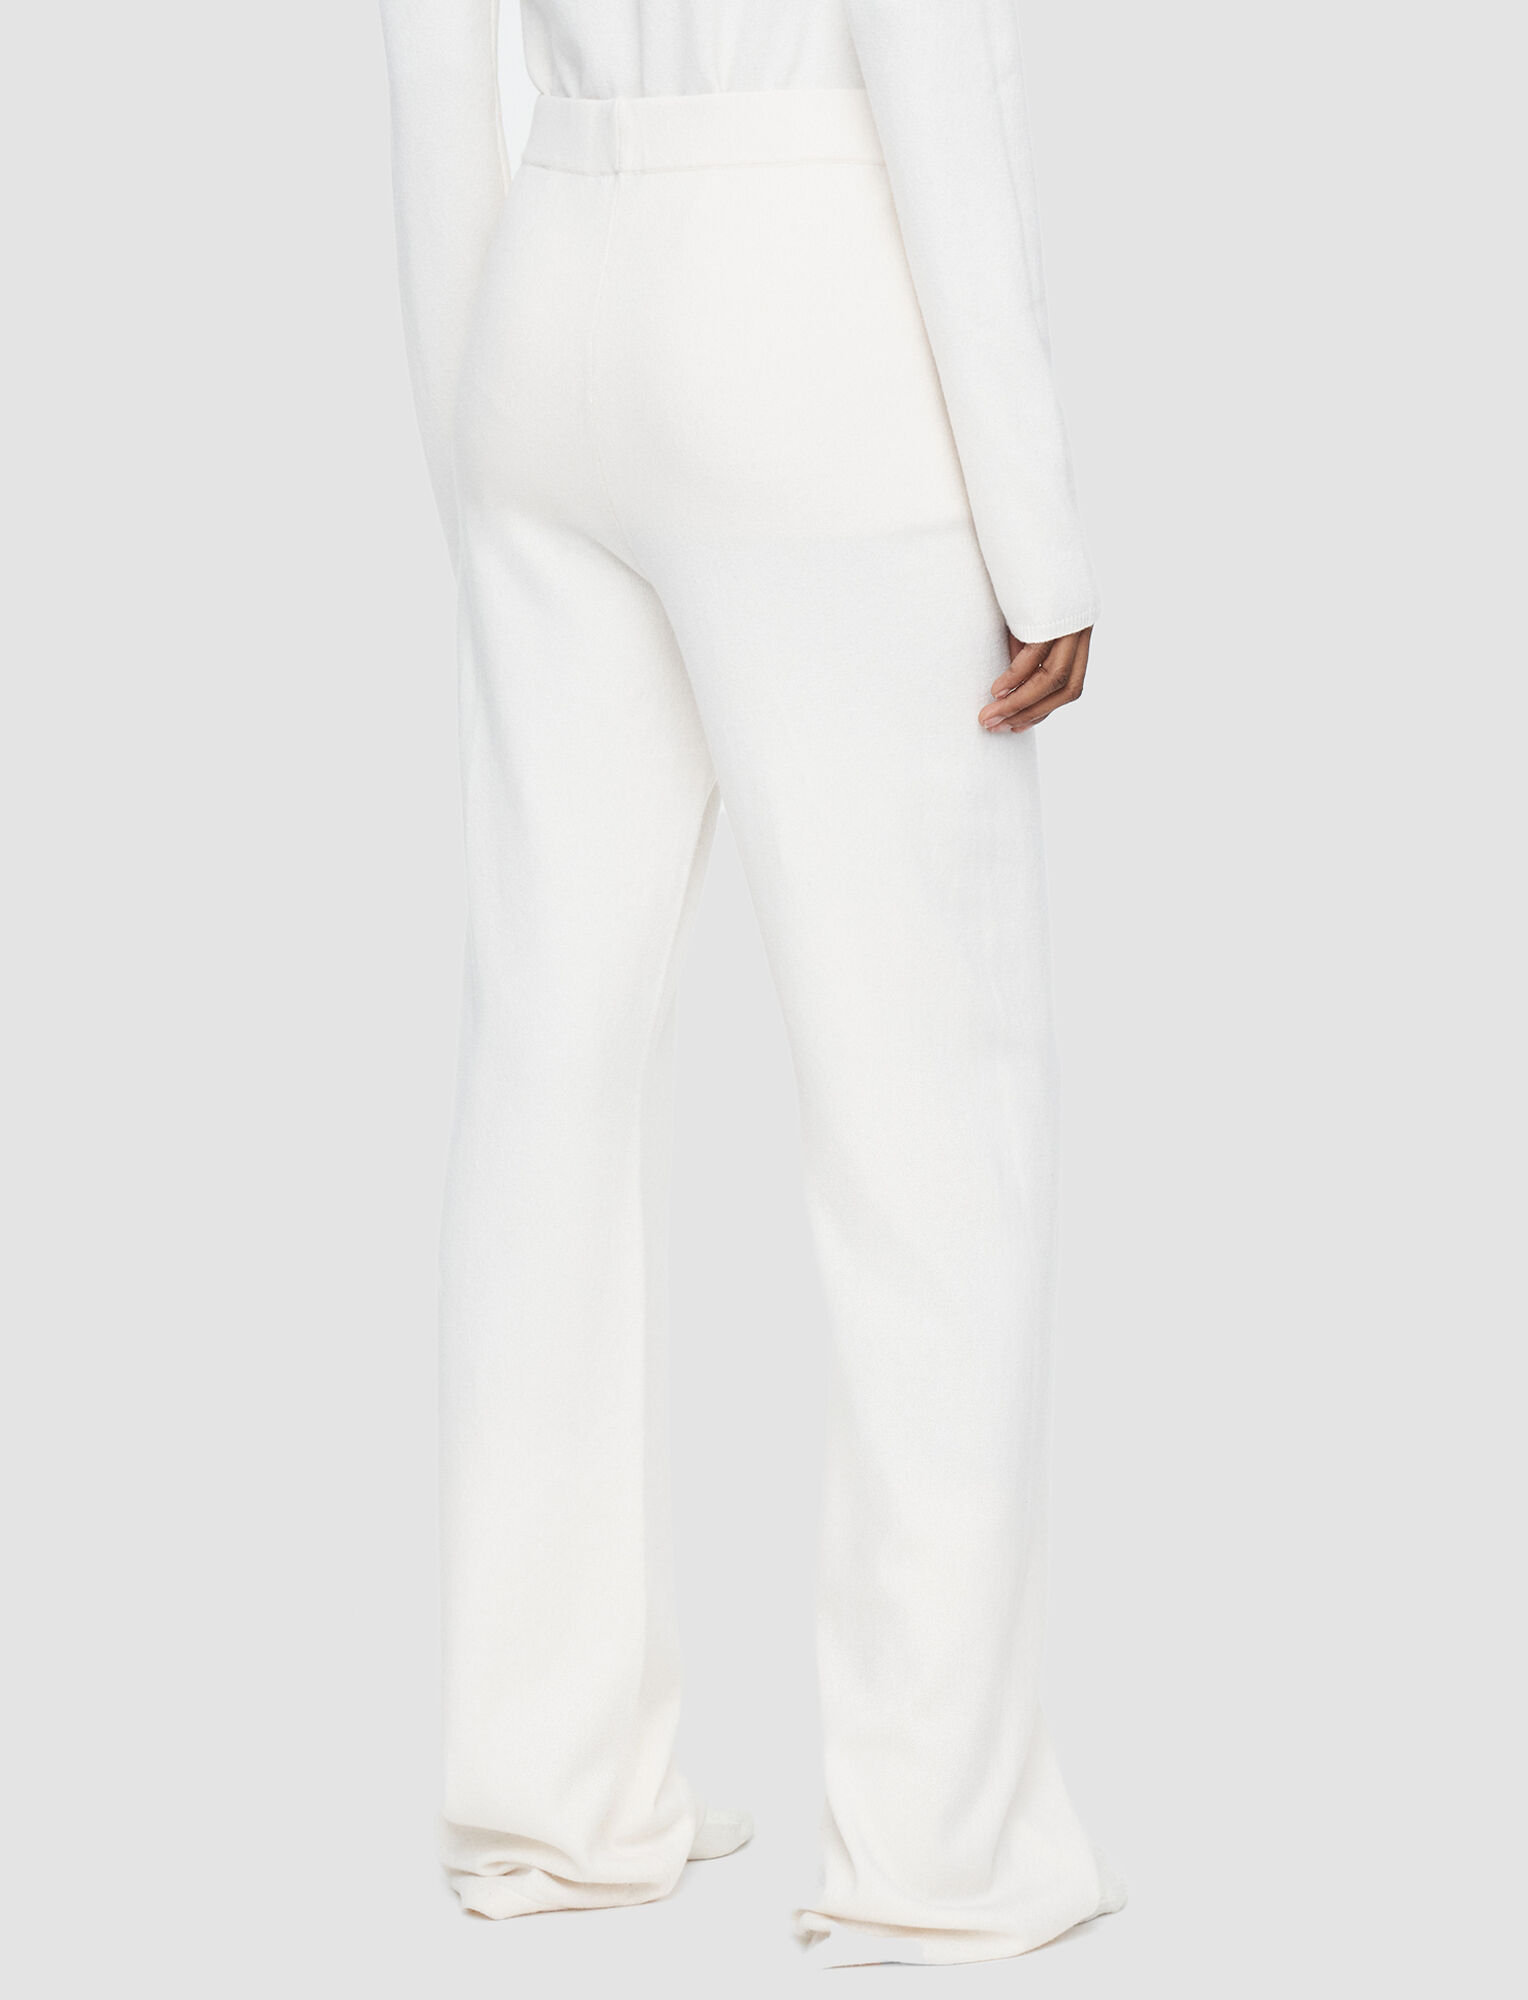 Joseph, Cosy Wool Cashmere Trousers, in Ivory